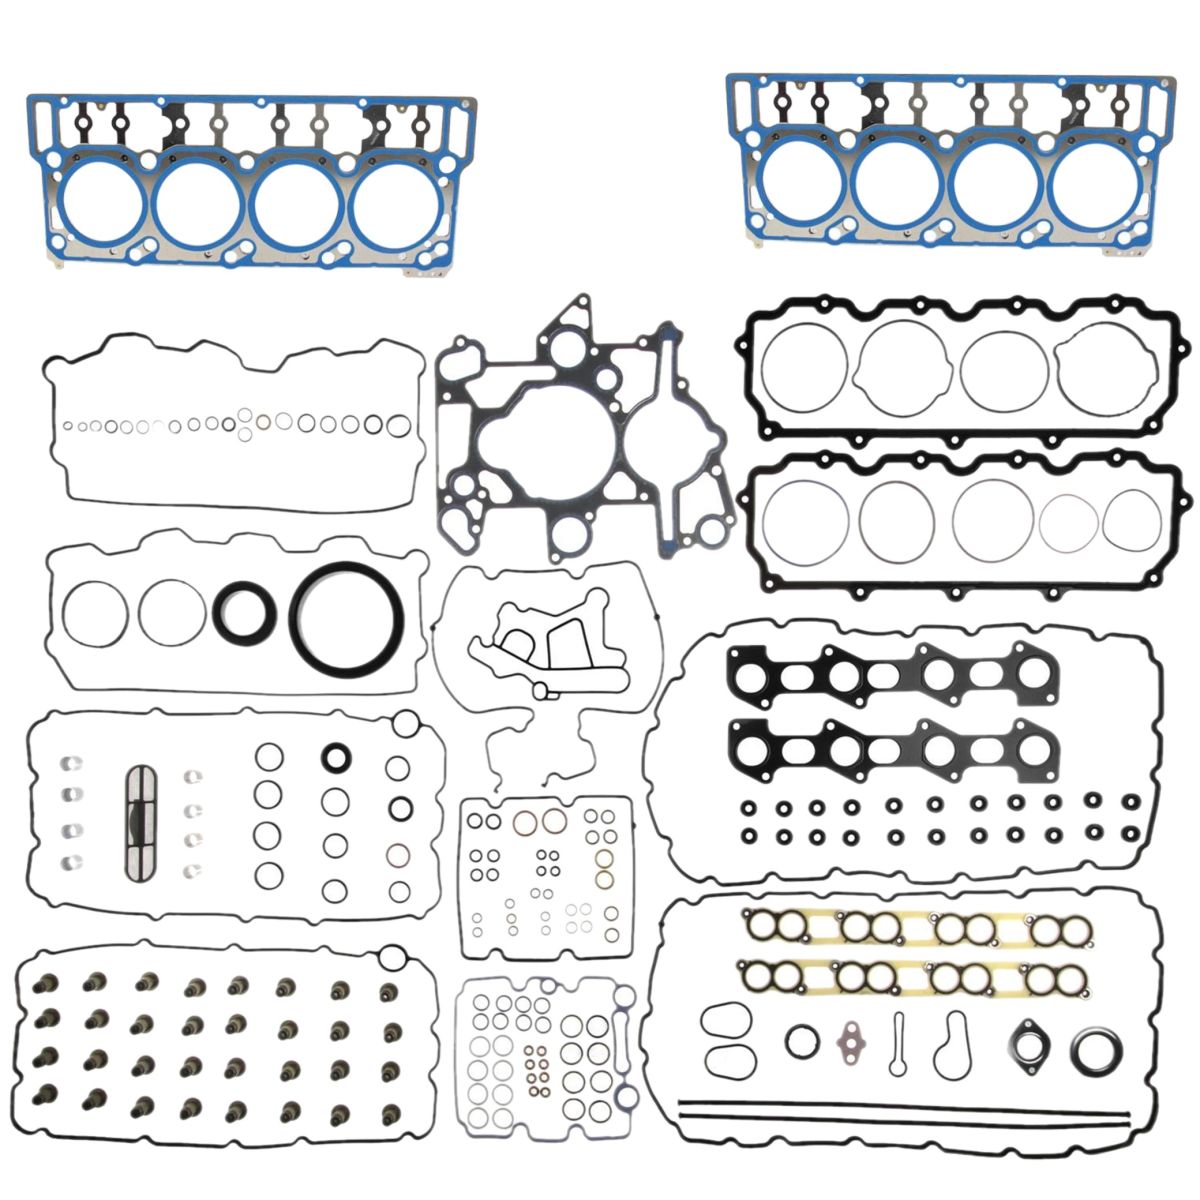 OEM Ford - OEM 18MM Head Gaskets - Mahle Engine Rebuild Kit For 03-06 Ford 6.0L Powerstroke